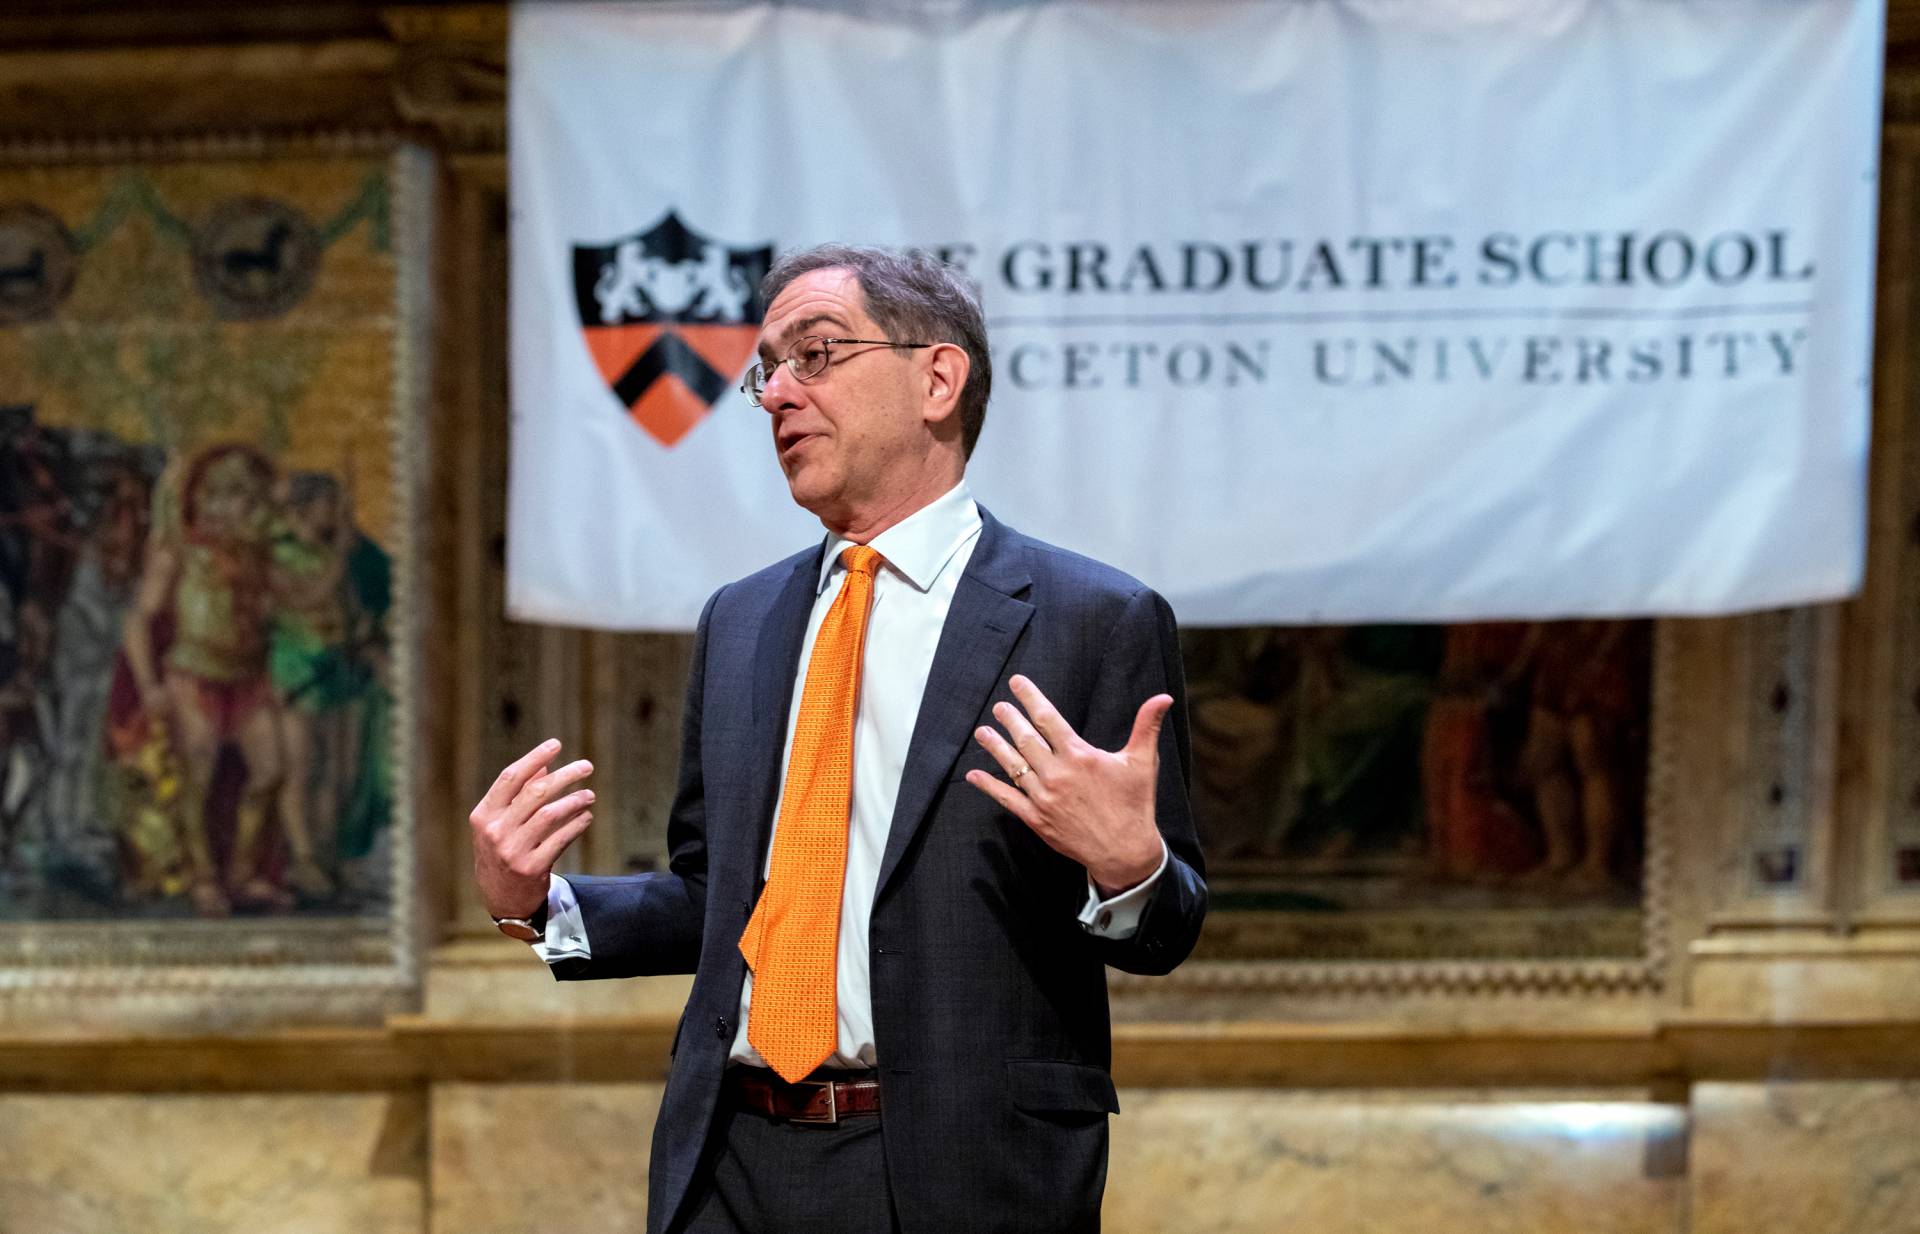 Christopher Eisgruber standing speaking in front of the Graduate School banner